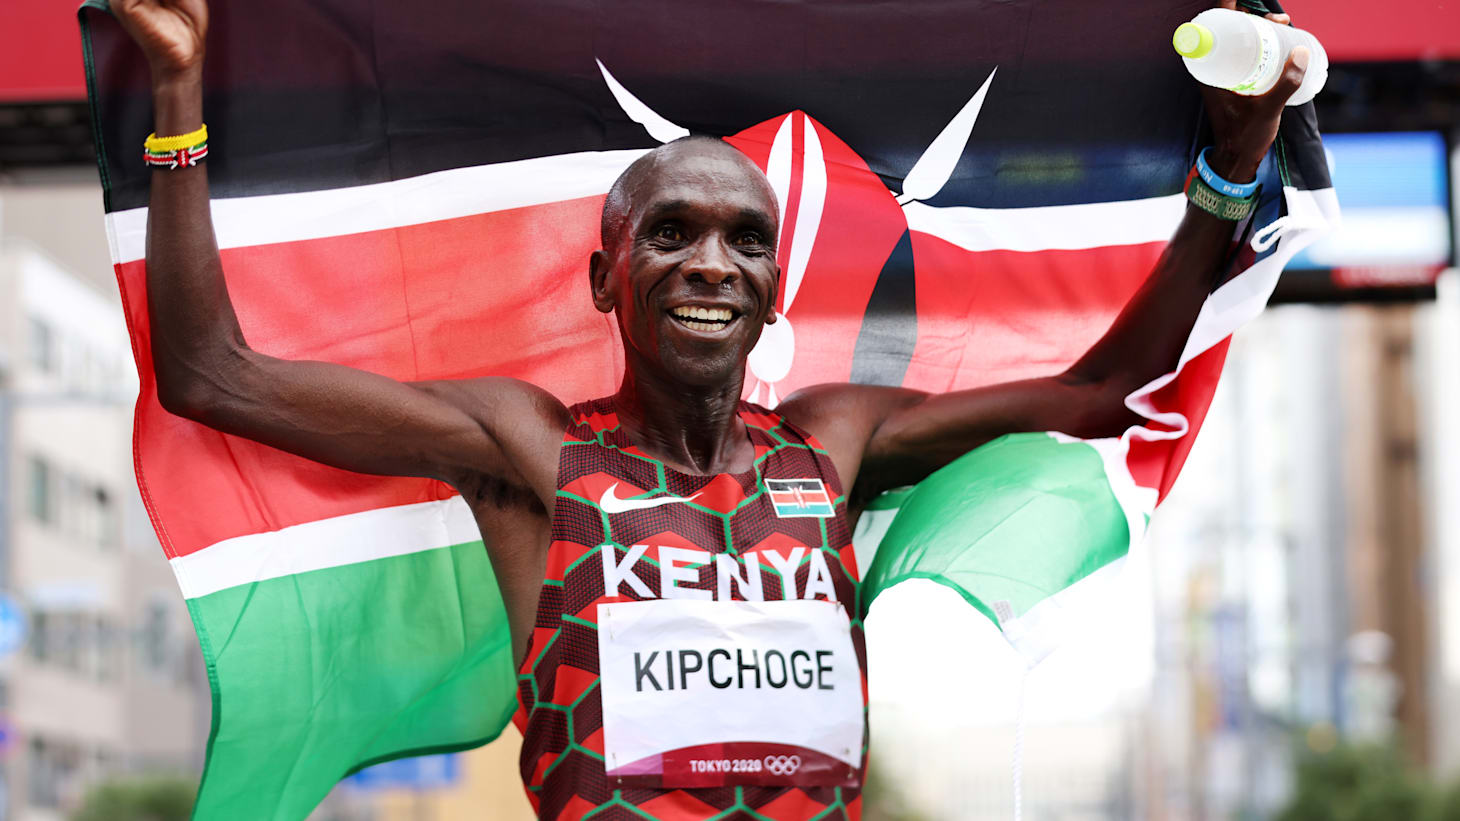 Eluid Kipchoge: His story & road at the Tokyo 2020 Olympics